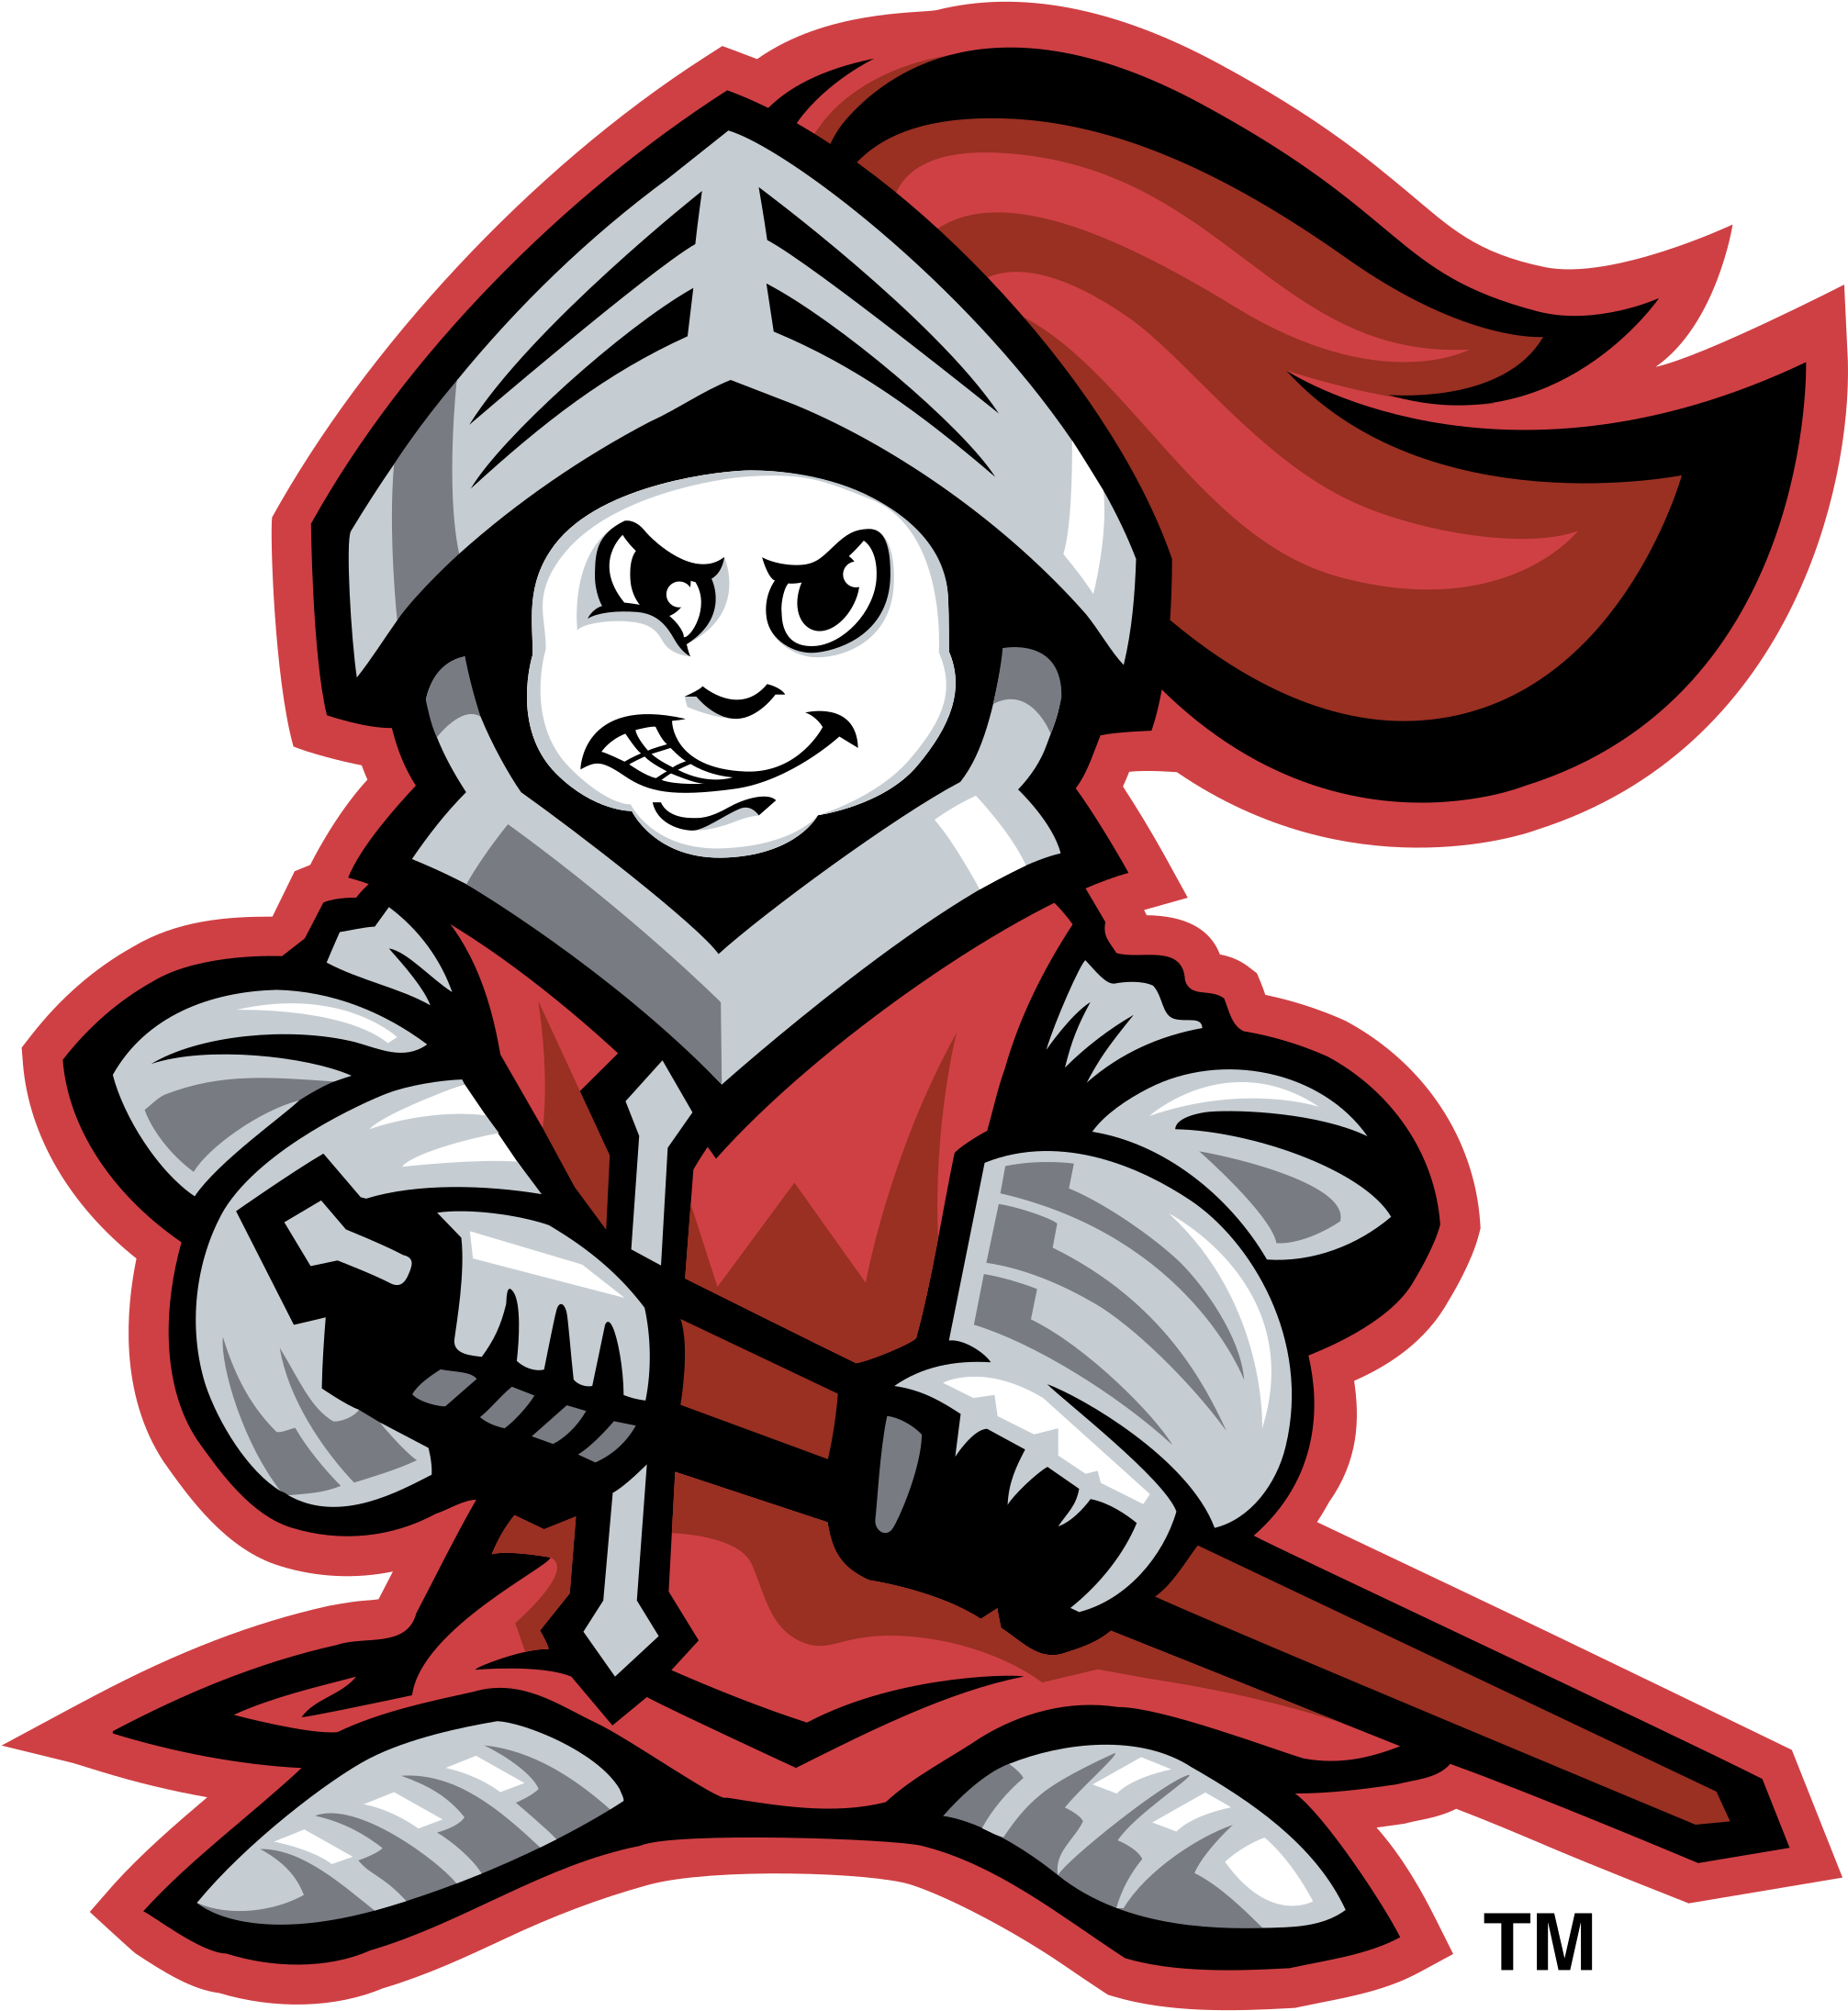 Rutgers Scarlet Knights Logo Black And White - Rutgers Mascot Scarlet Knight (2400x2400)